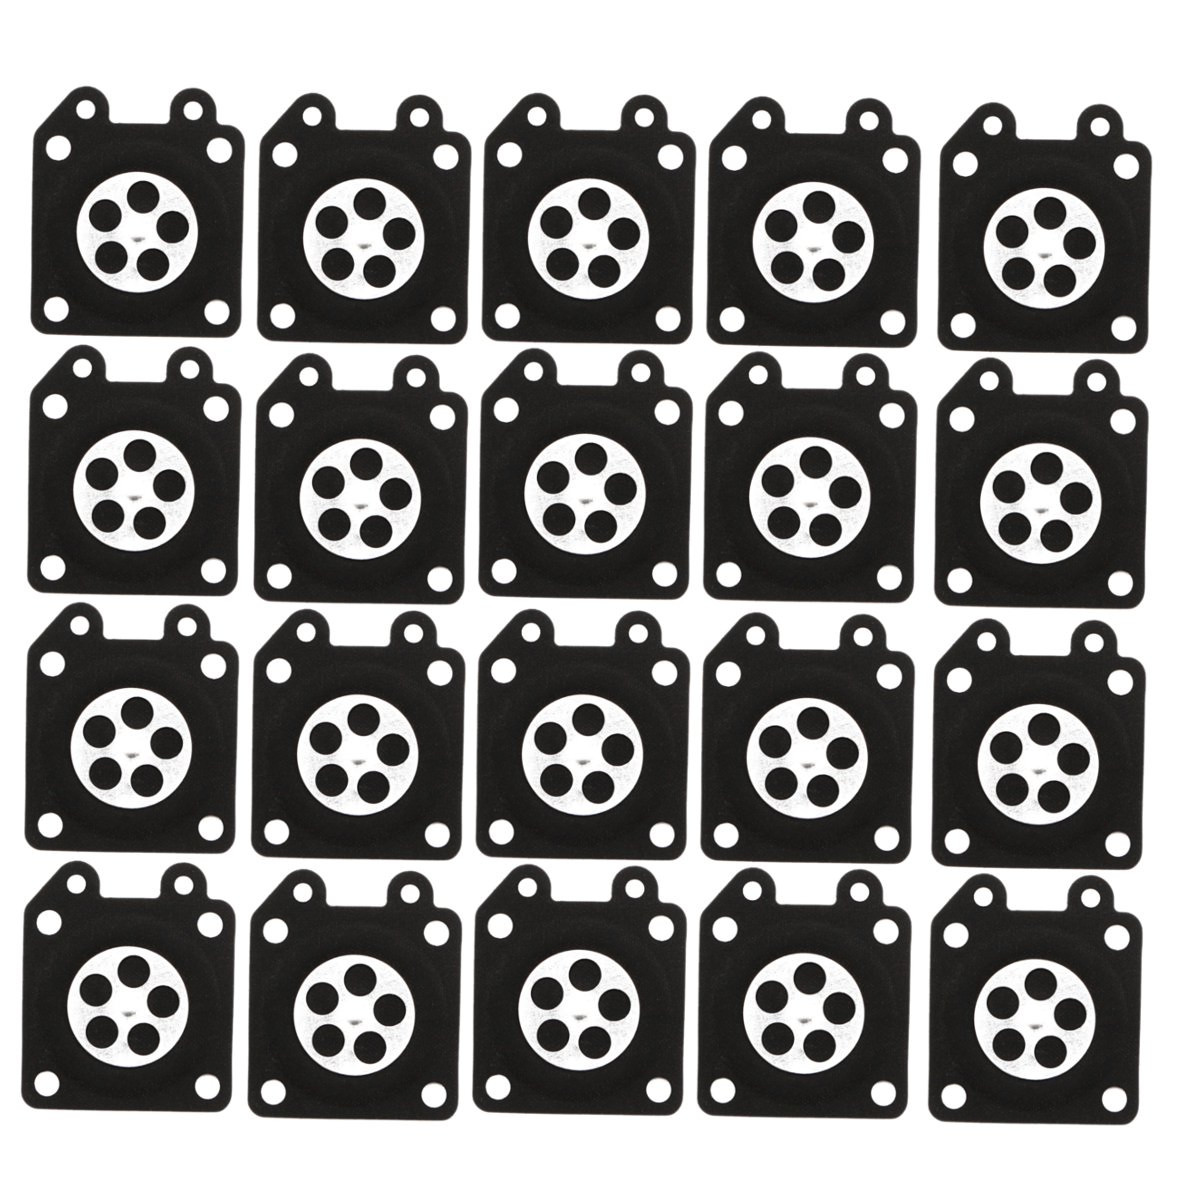 20pcs Gardening Chainsaw Metering Diaphragm Replacement for Walbro